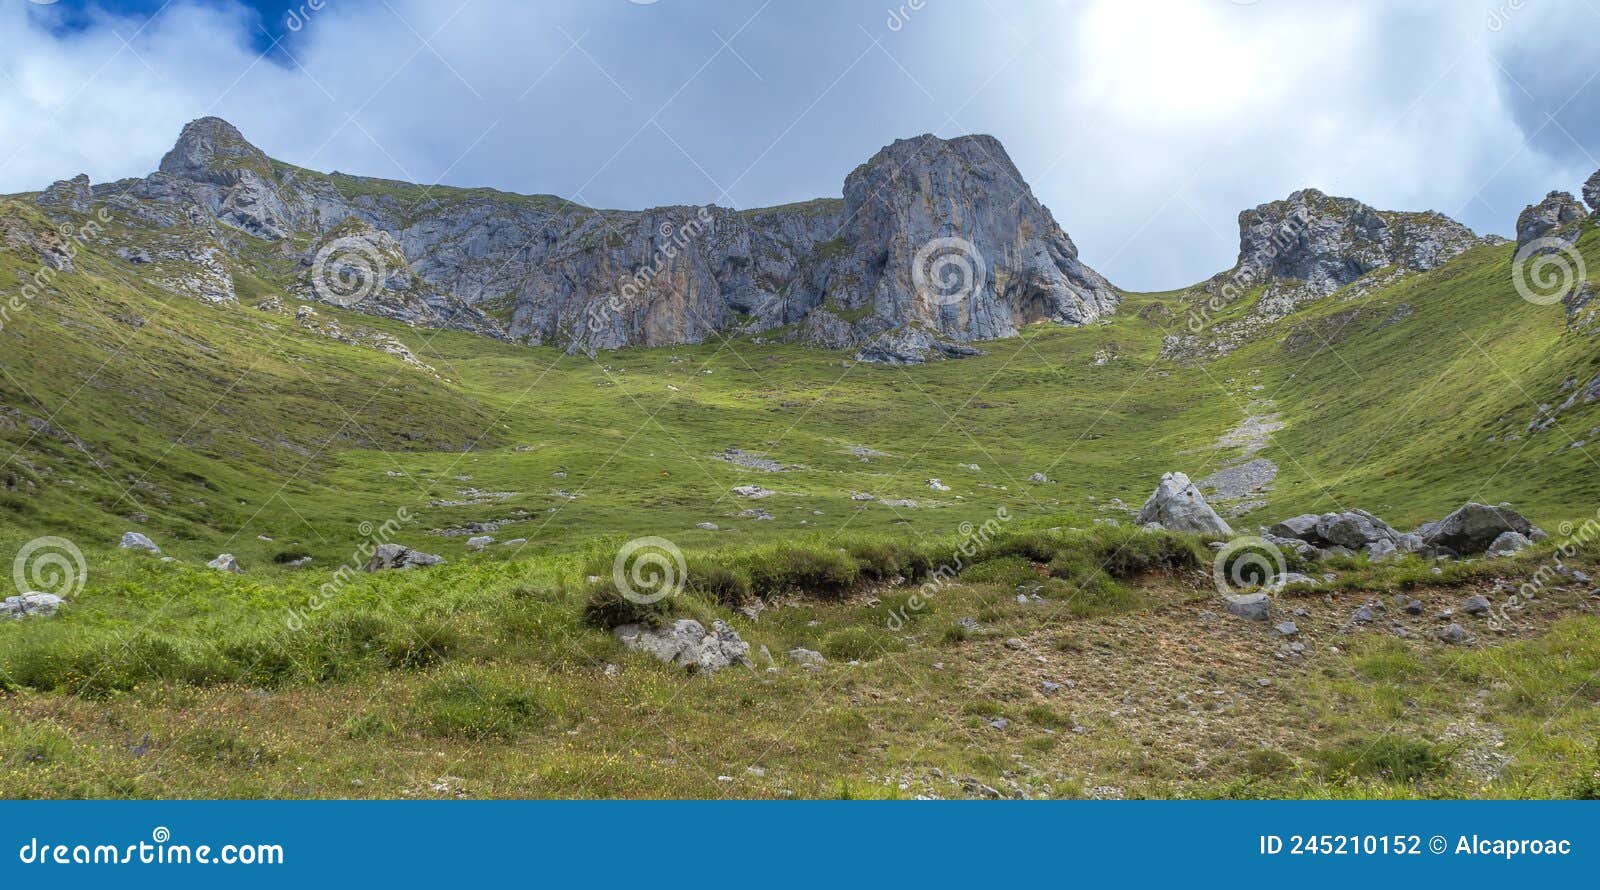 peaks of central massif from sotres, picos de europa national park, spain